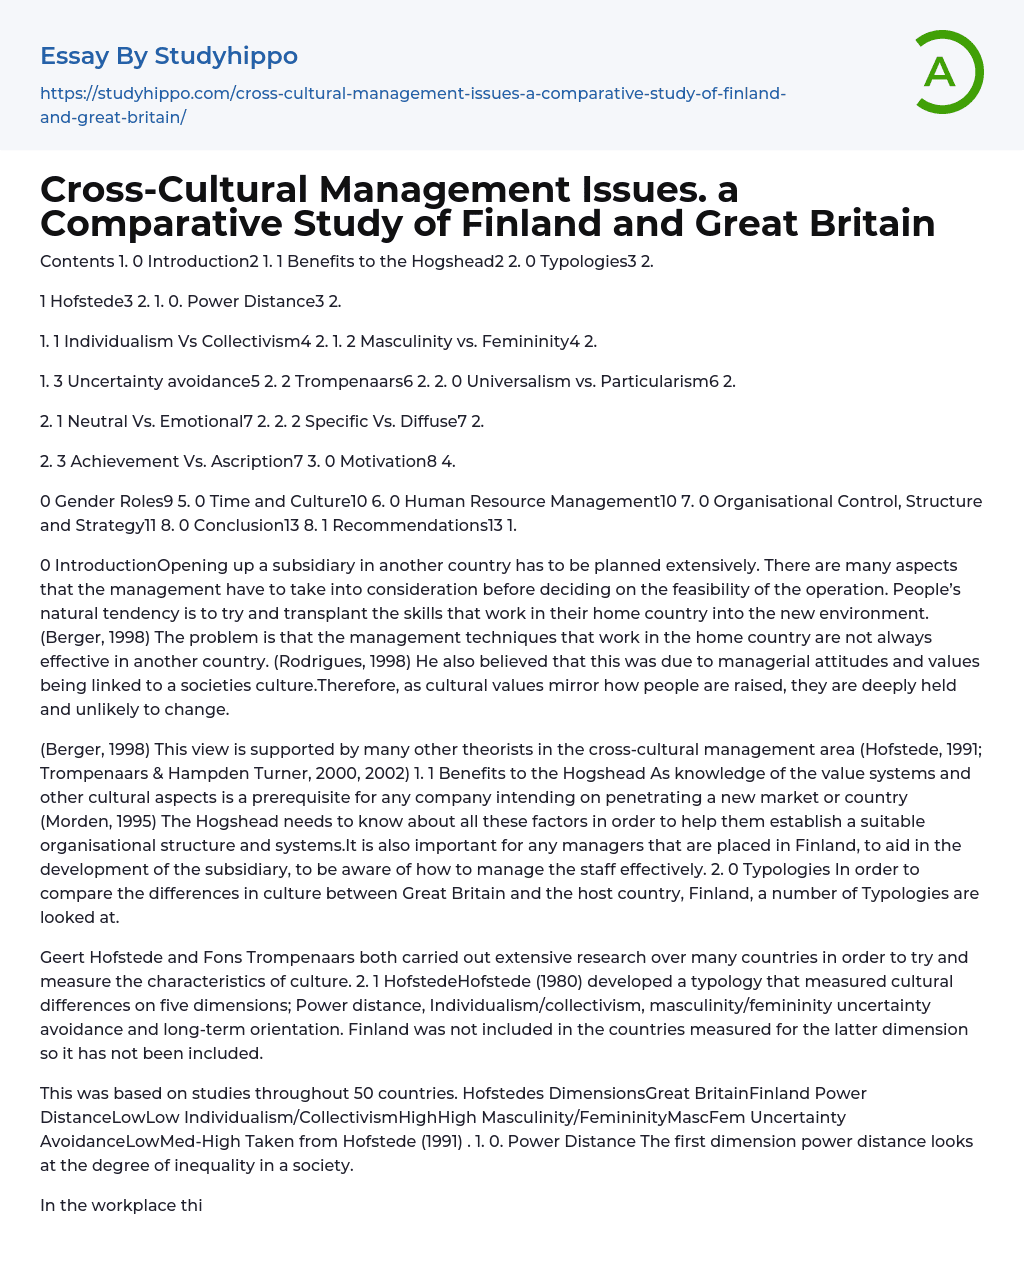 Cross-Cultural Management Issues: Comparative Study of Finland and Great Britain Essay Example